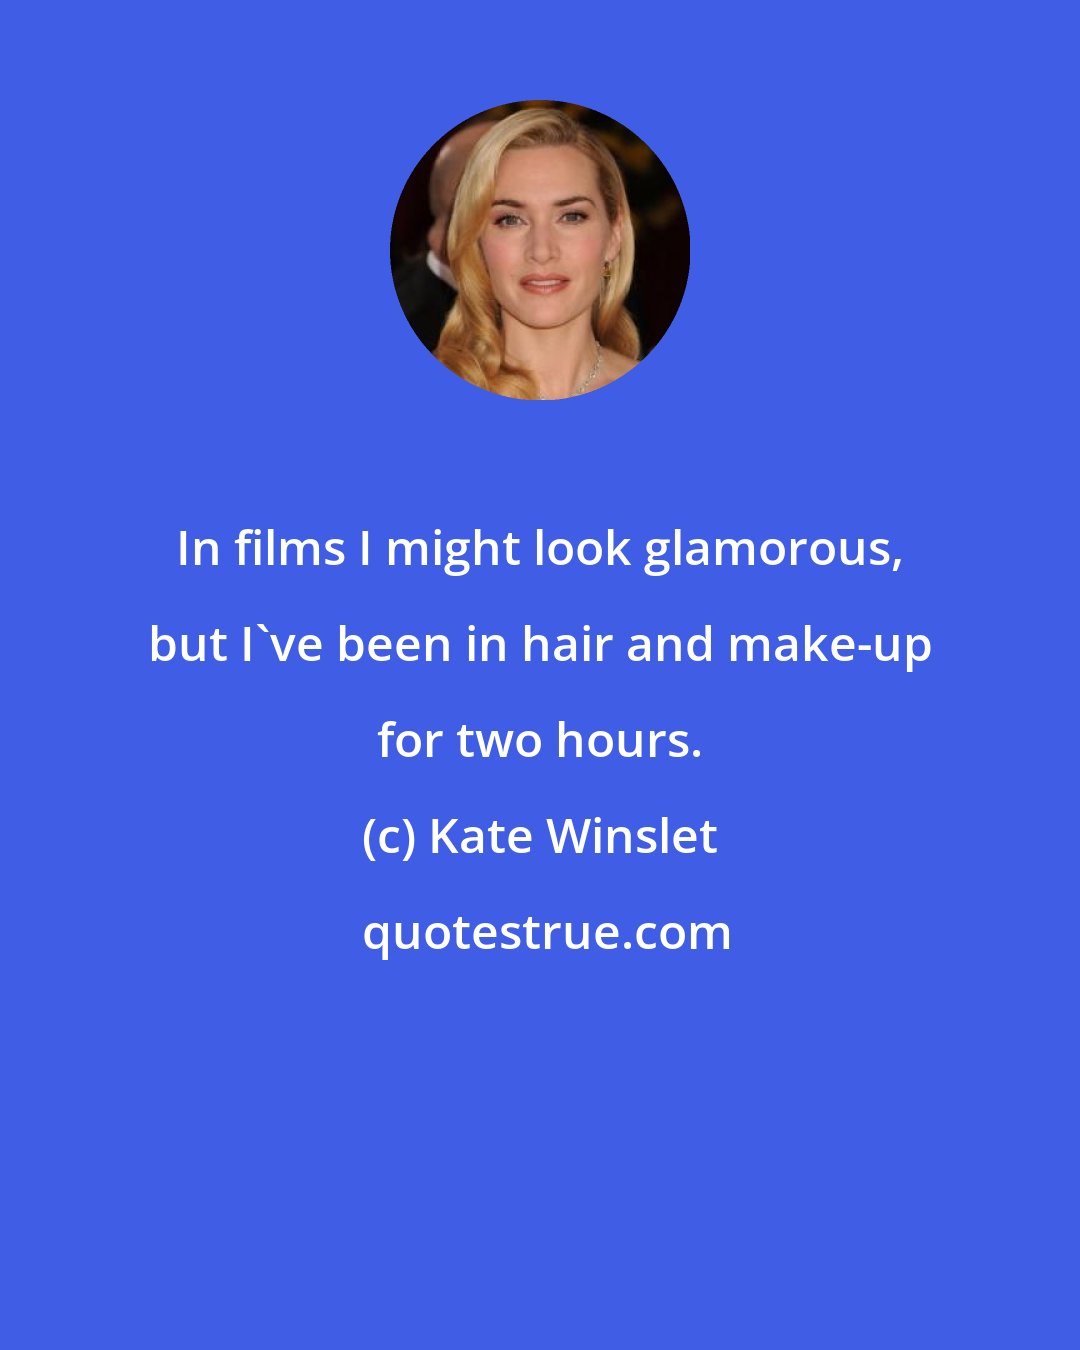 Kate Winslet: In films I might look glamorous, but I've been in hair and make-up for two hours.